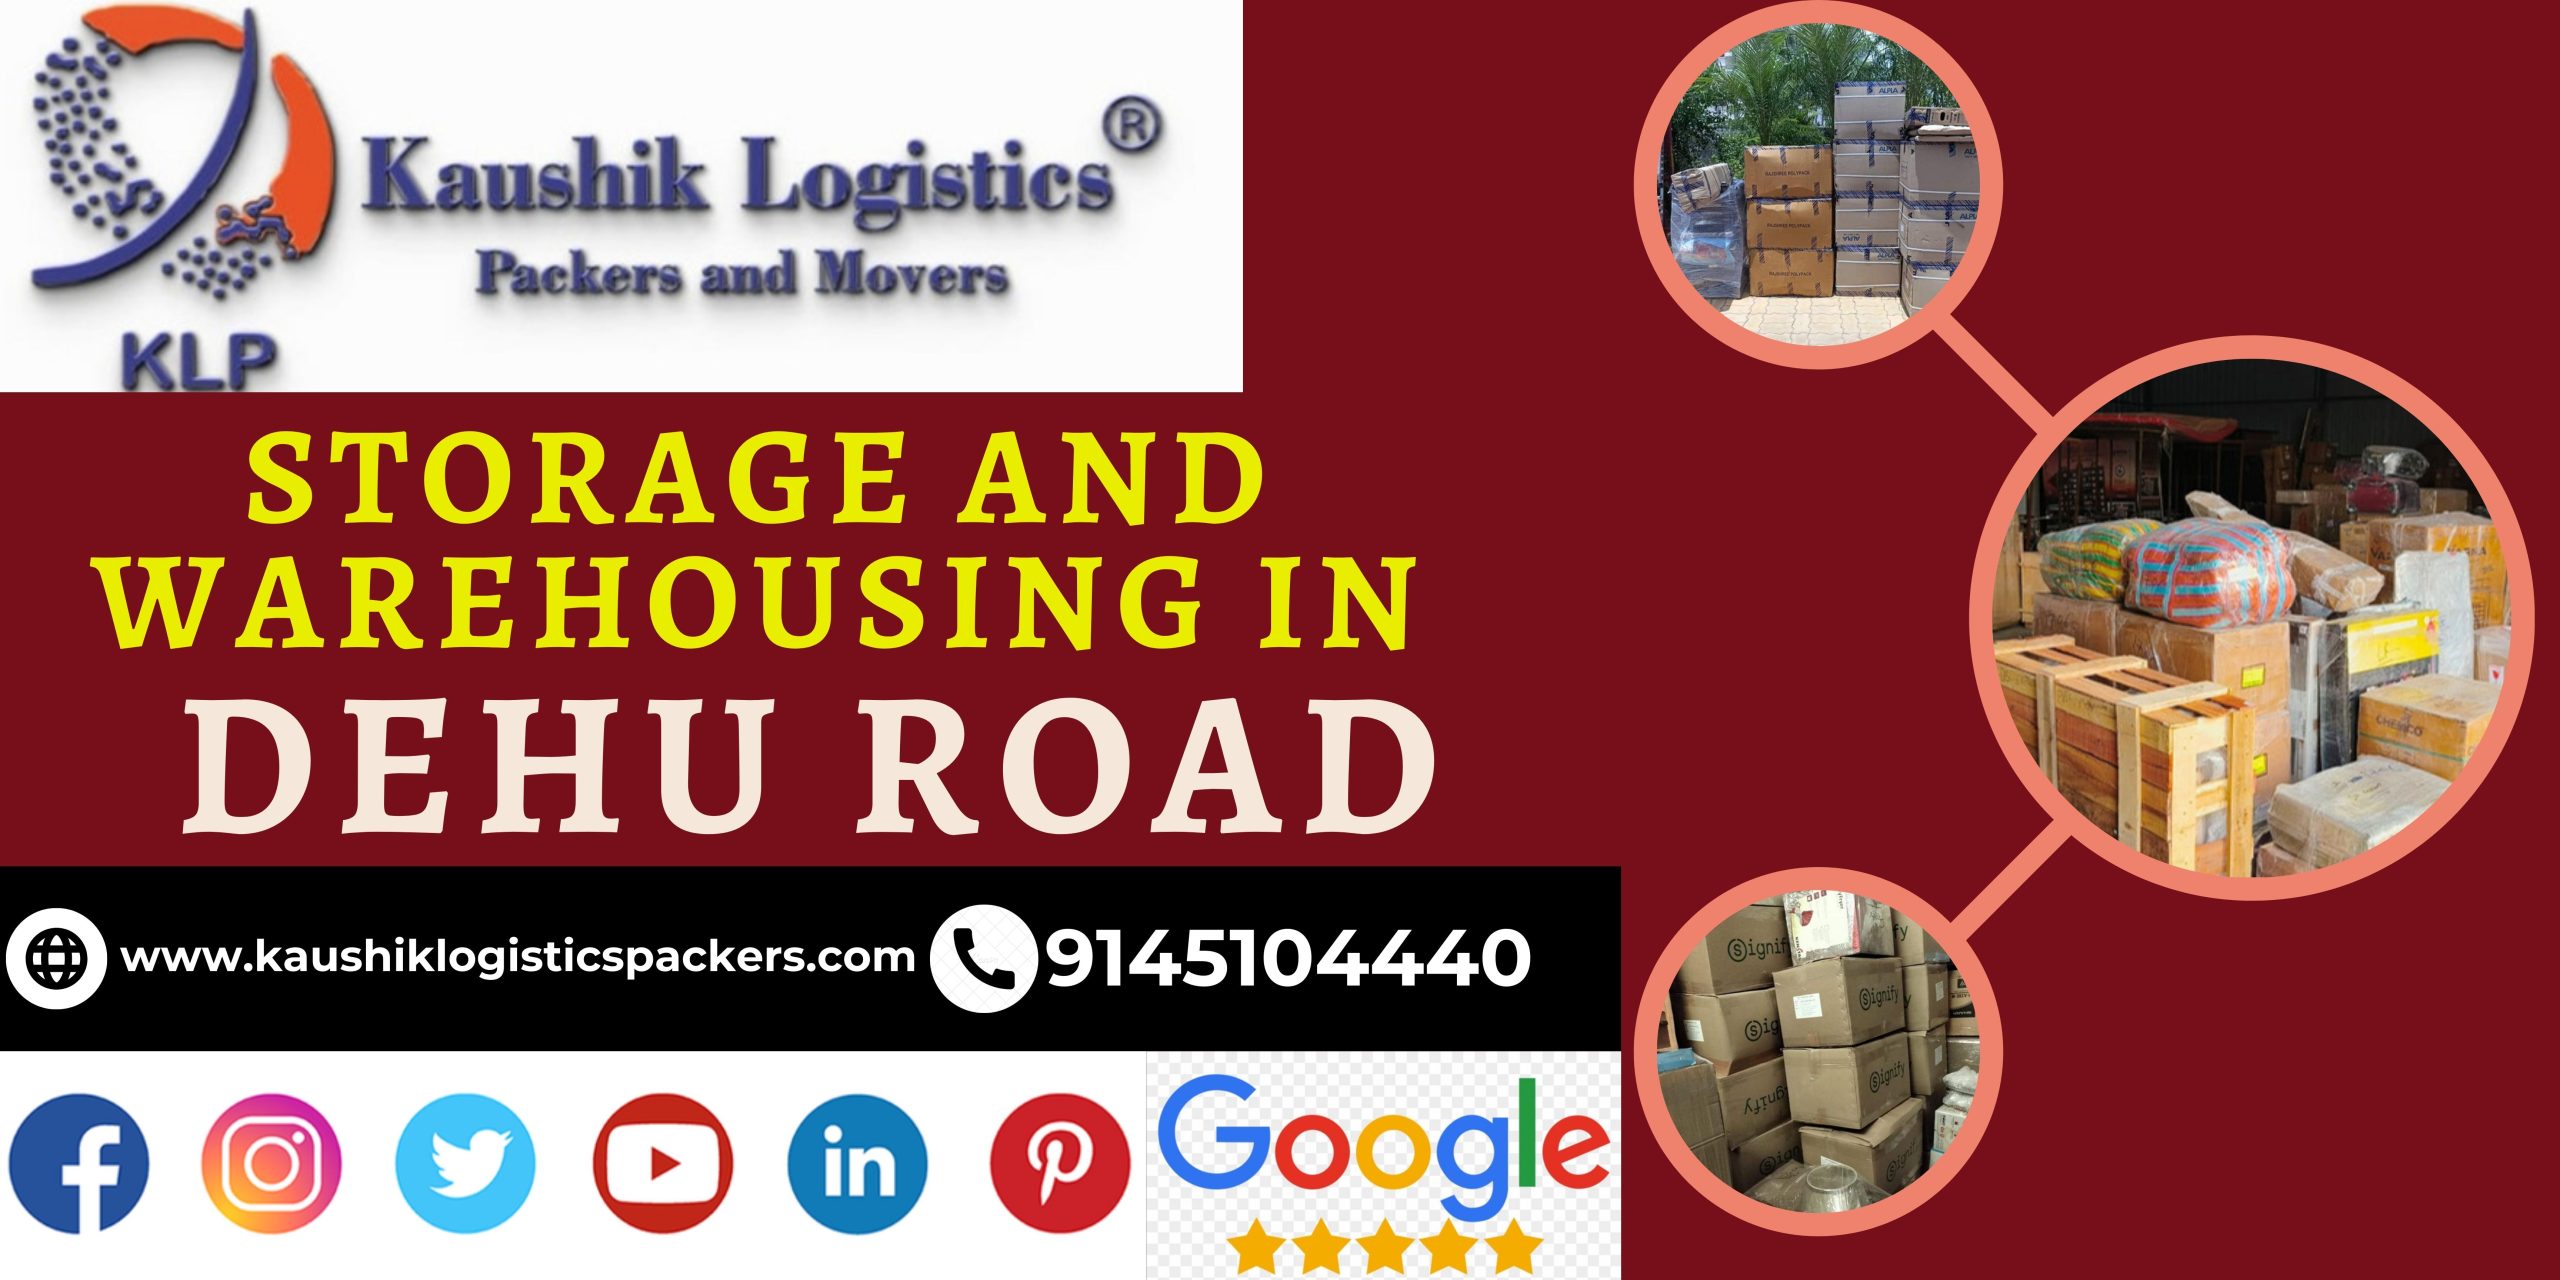 Packers and Movers In Dehu Road